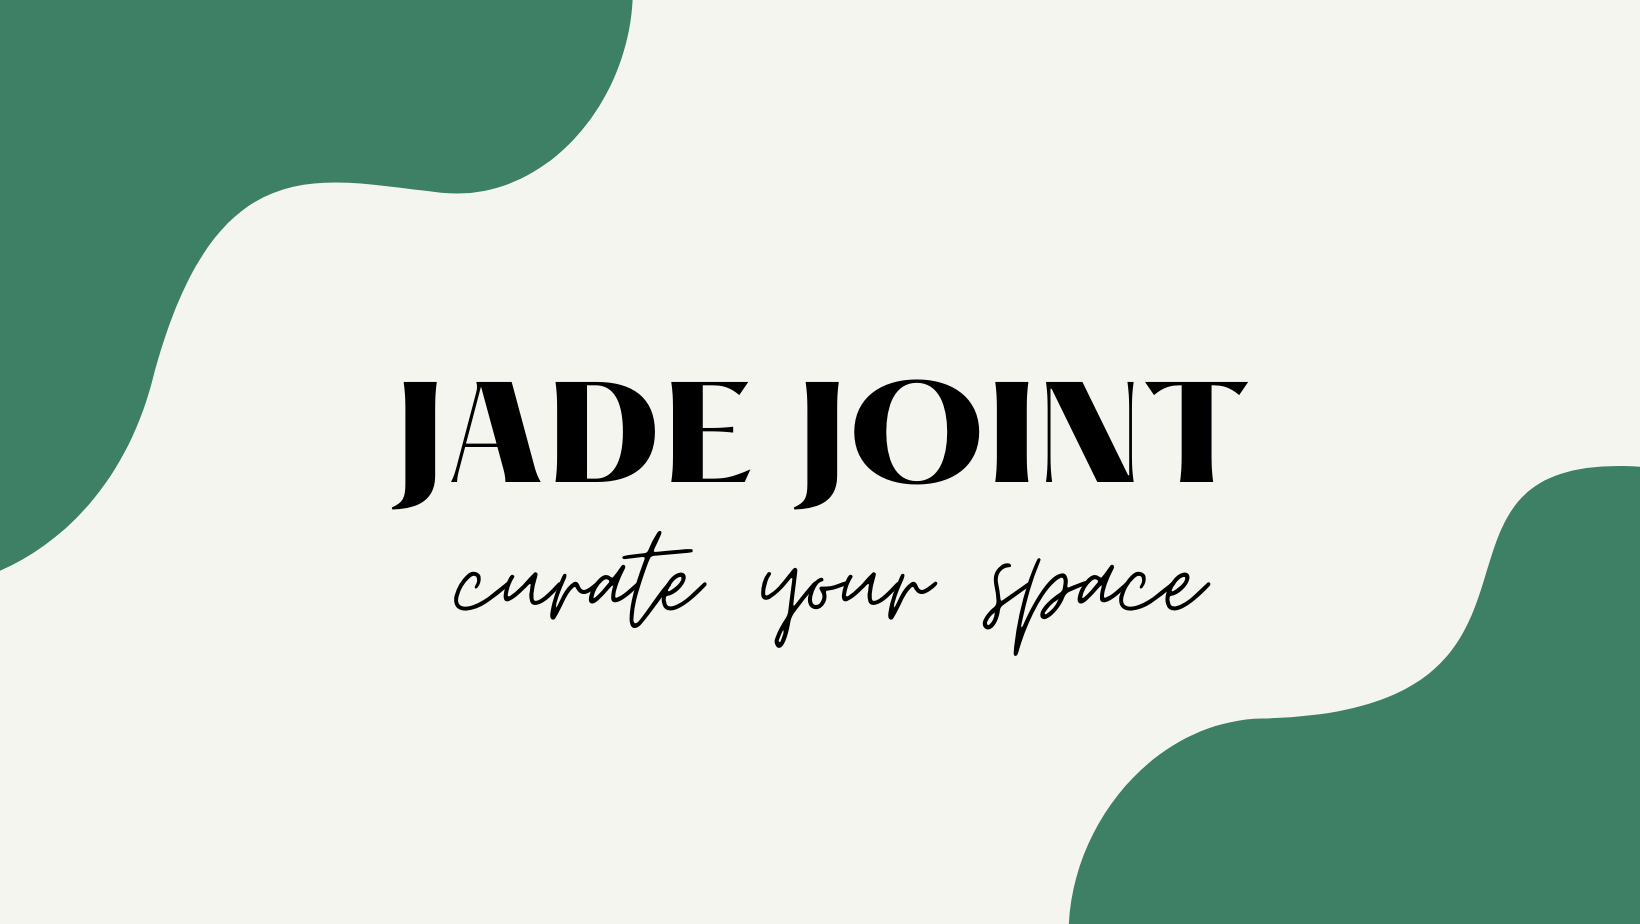 Jade Joint